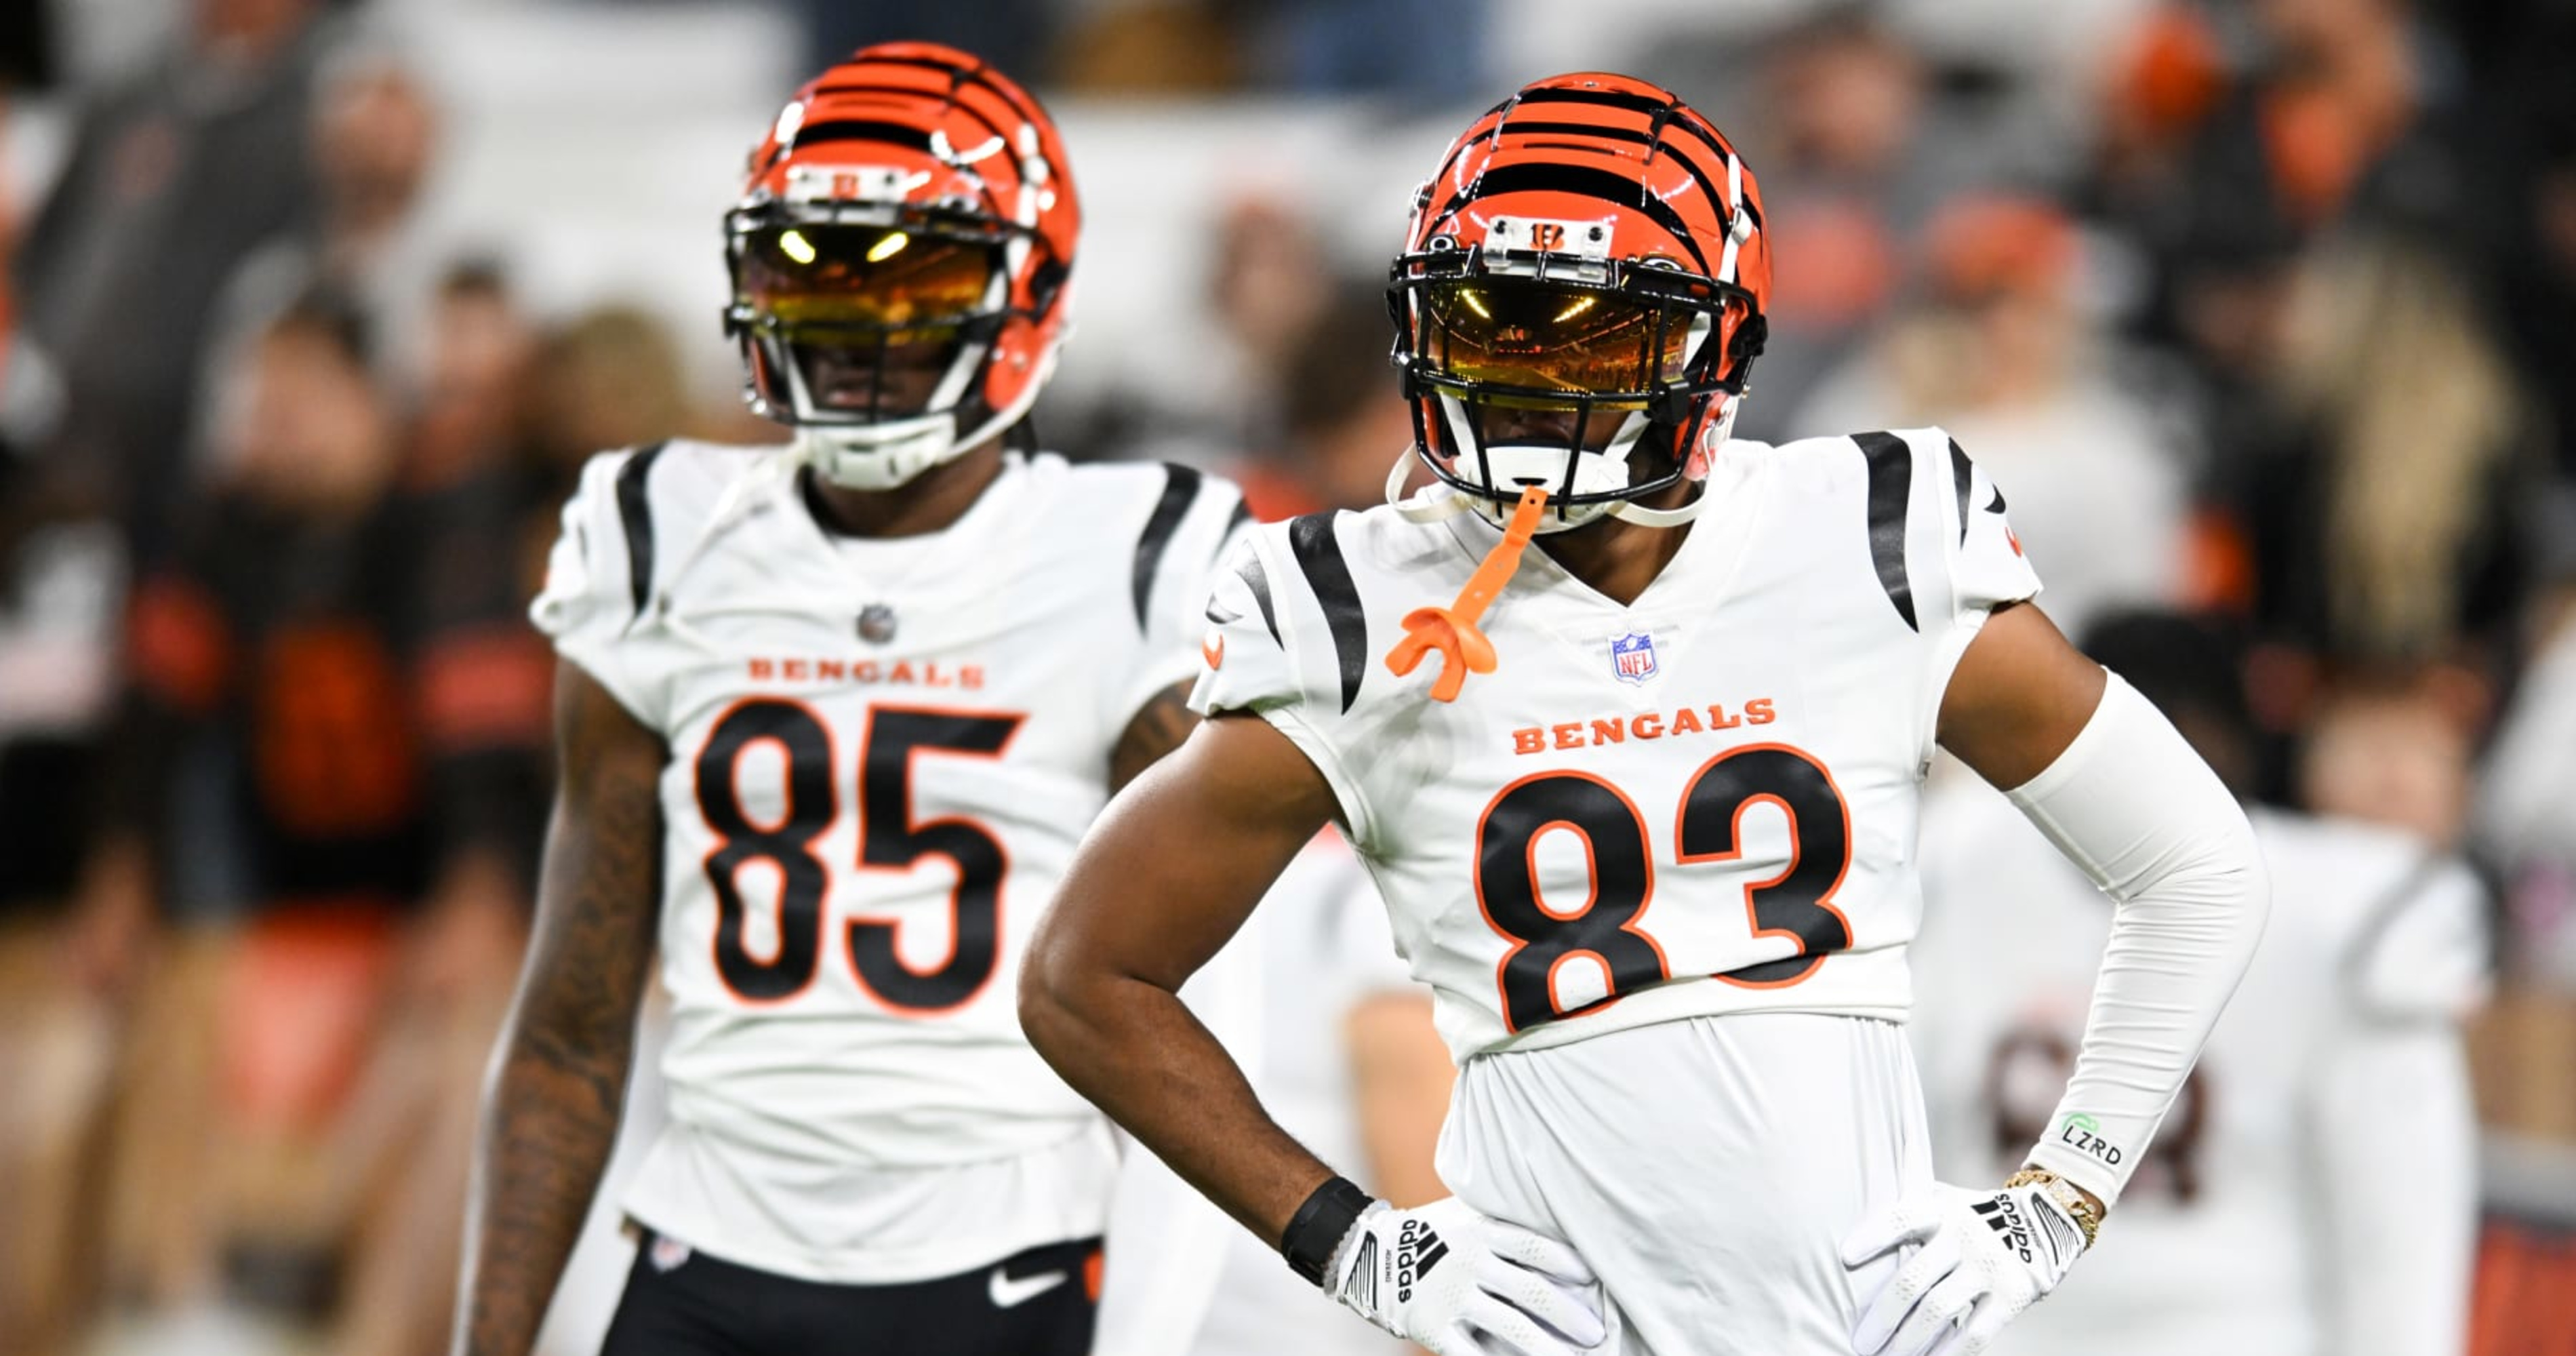 Bengals receivers eager for matchup against Bills secondary